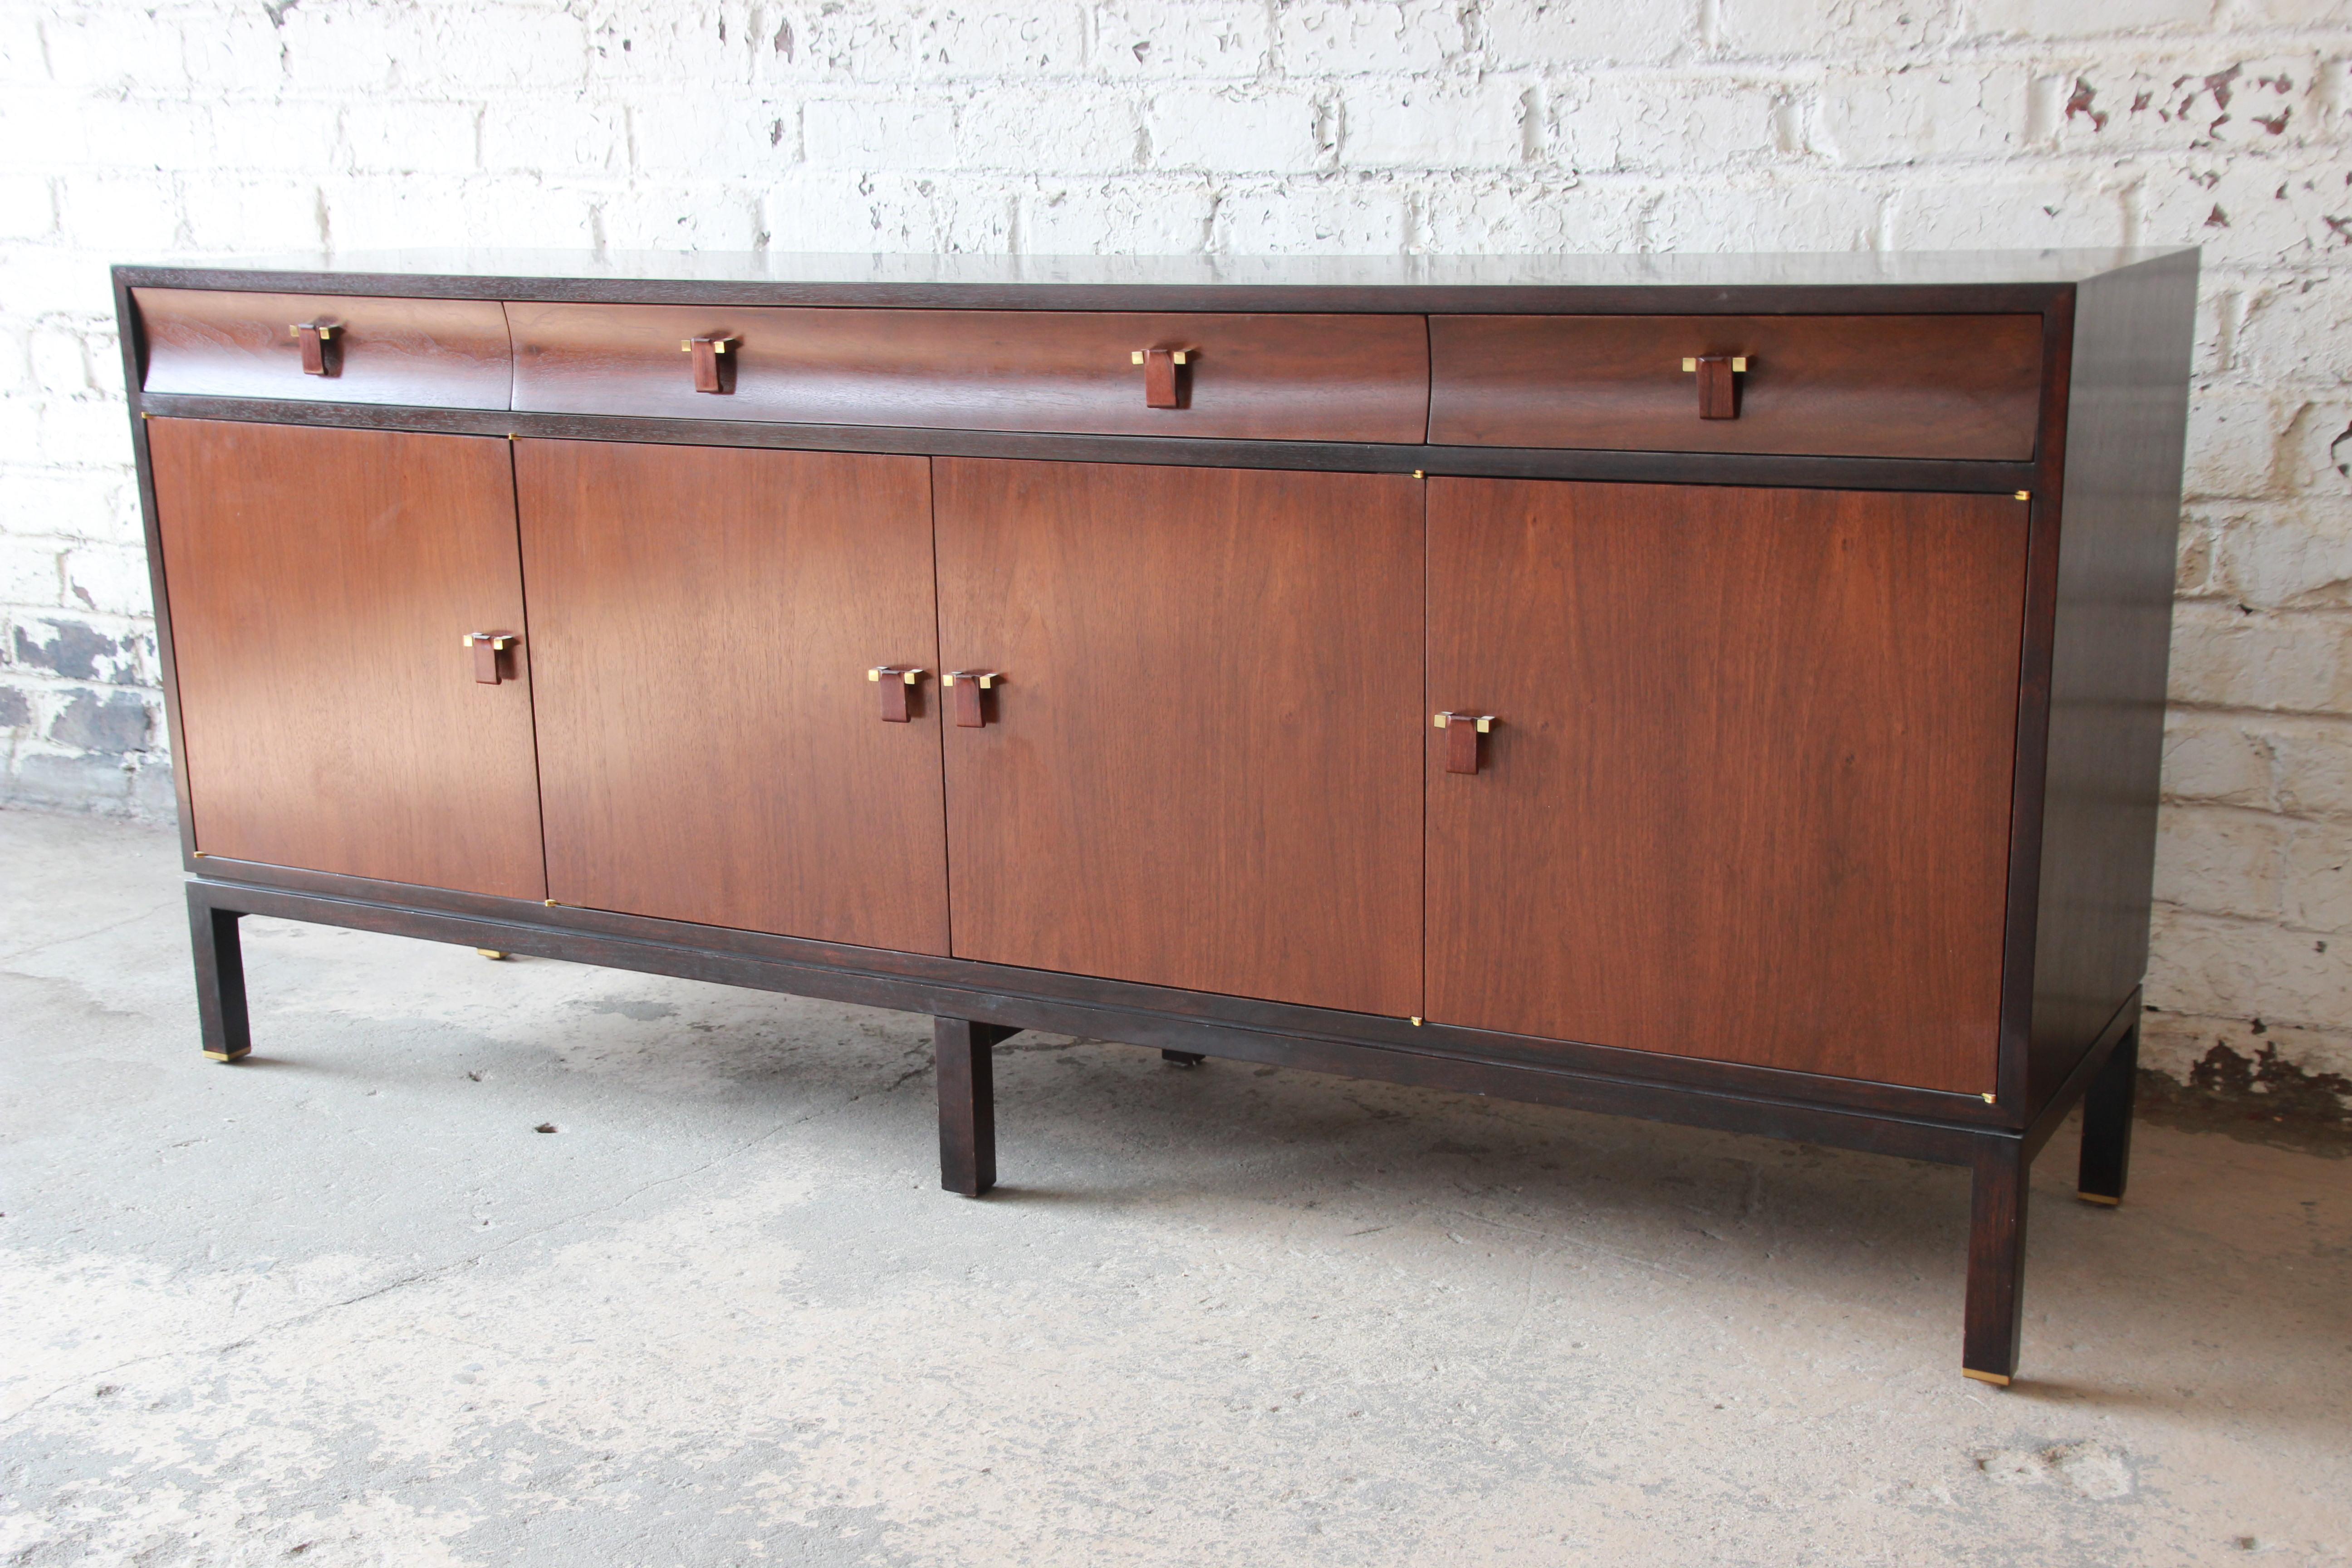 Offering an exceptional sideboard credenza by Edward Wormley for Dunbar. The unique statement piece features a great two-toned design with an ebonized case and walnut drawer and cabinet fronts. The pulls are also carved walnut adding to the elegant